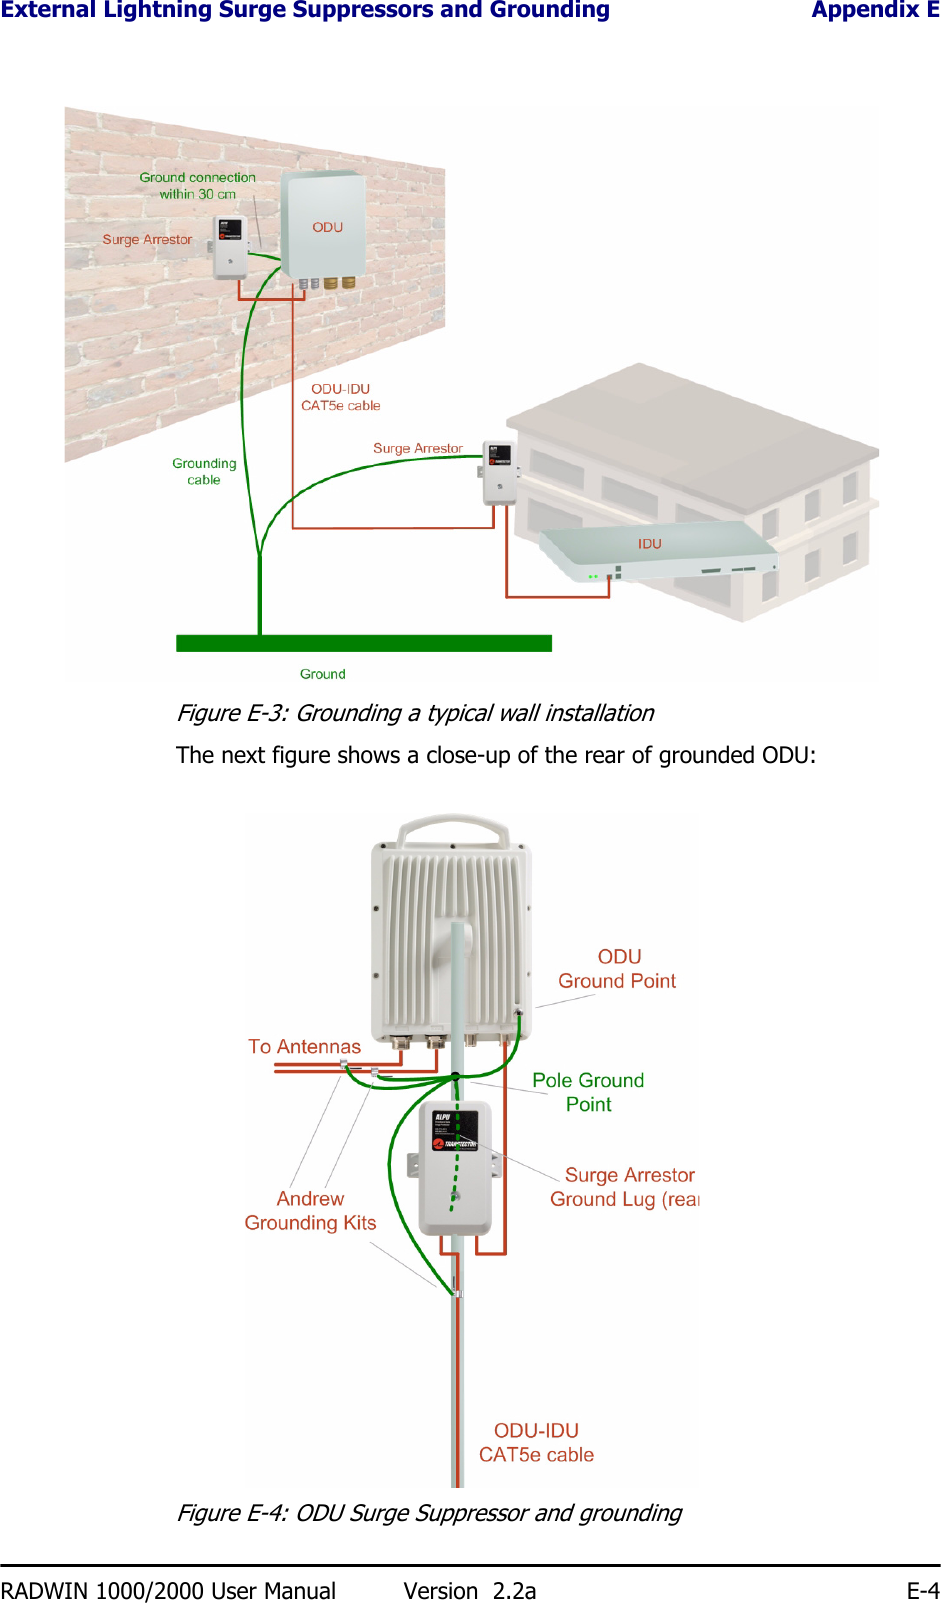 External Lightning Surge Suppressors and Grounding Appendix ERADWIN 1000/2000 User Manual Version  2.2a E-4Figure E-3: Grounding a typical wall installationThe next figure shows a close-up of the rear of grounded ODU:Figure E-4: ODU Surge Suppressor and grounding